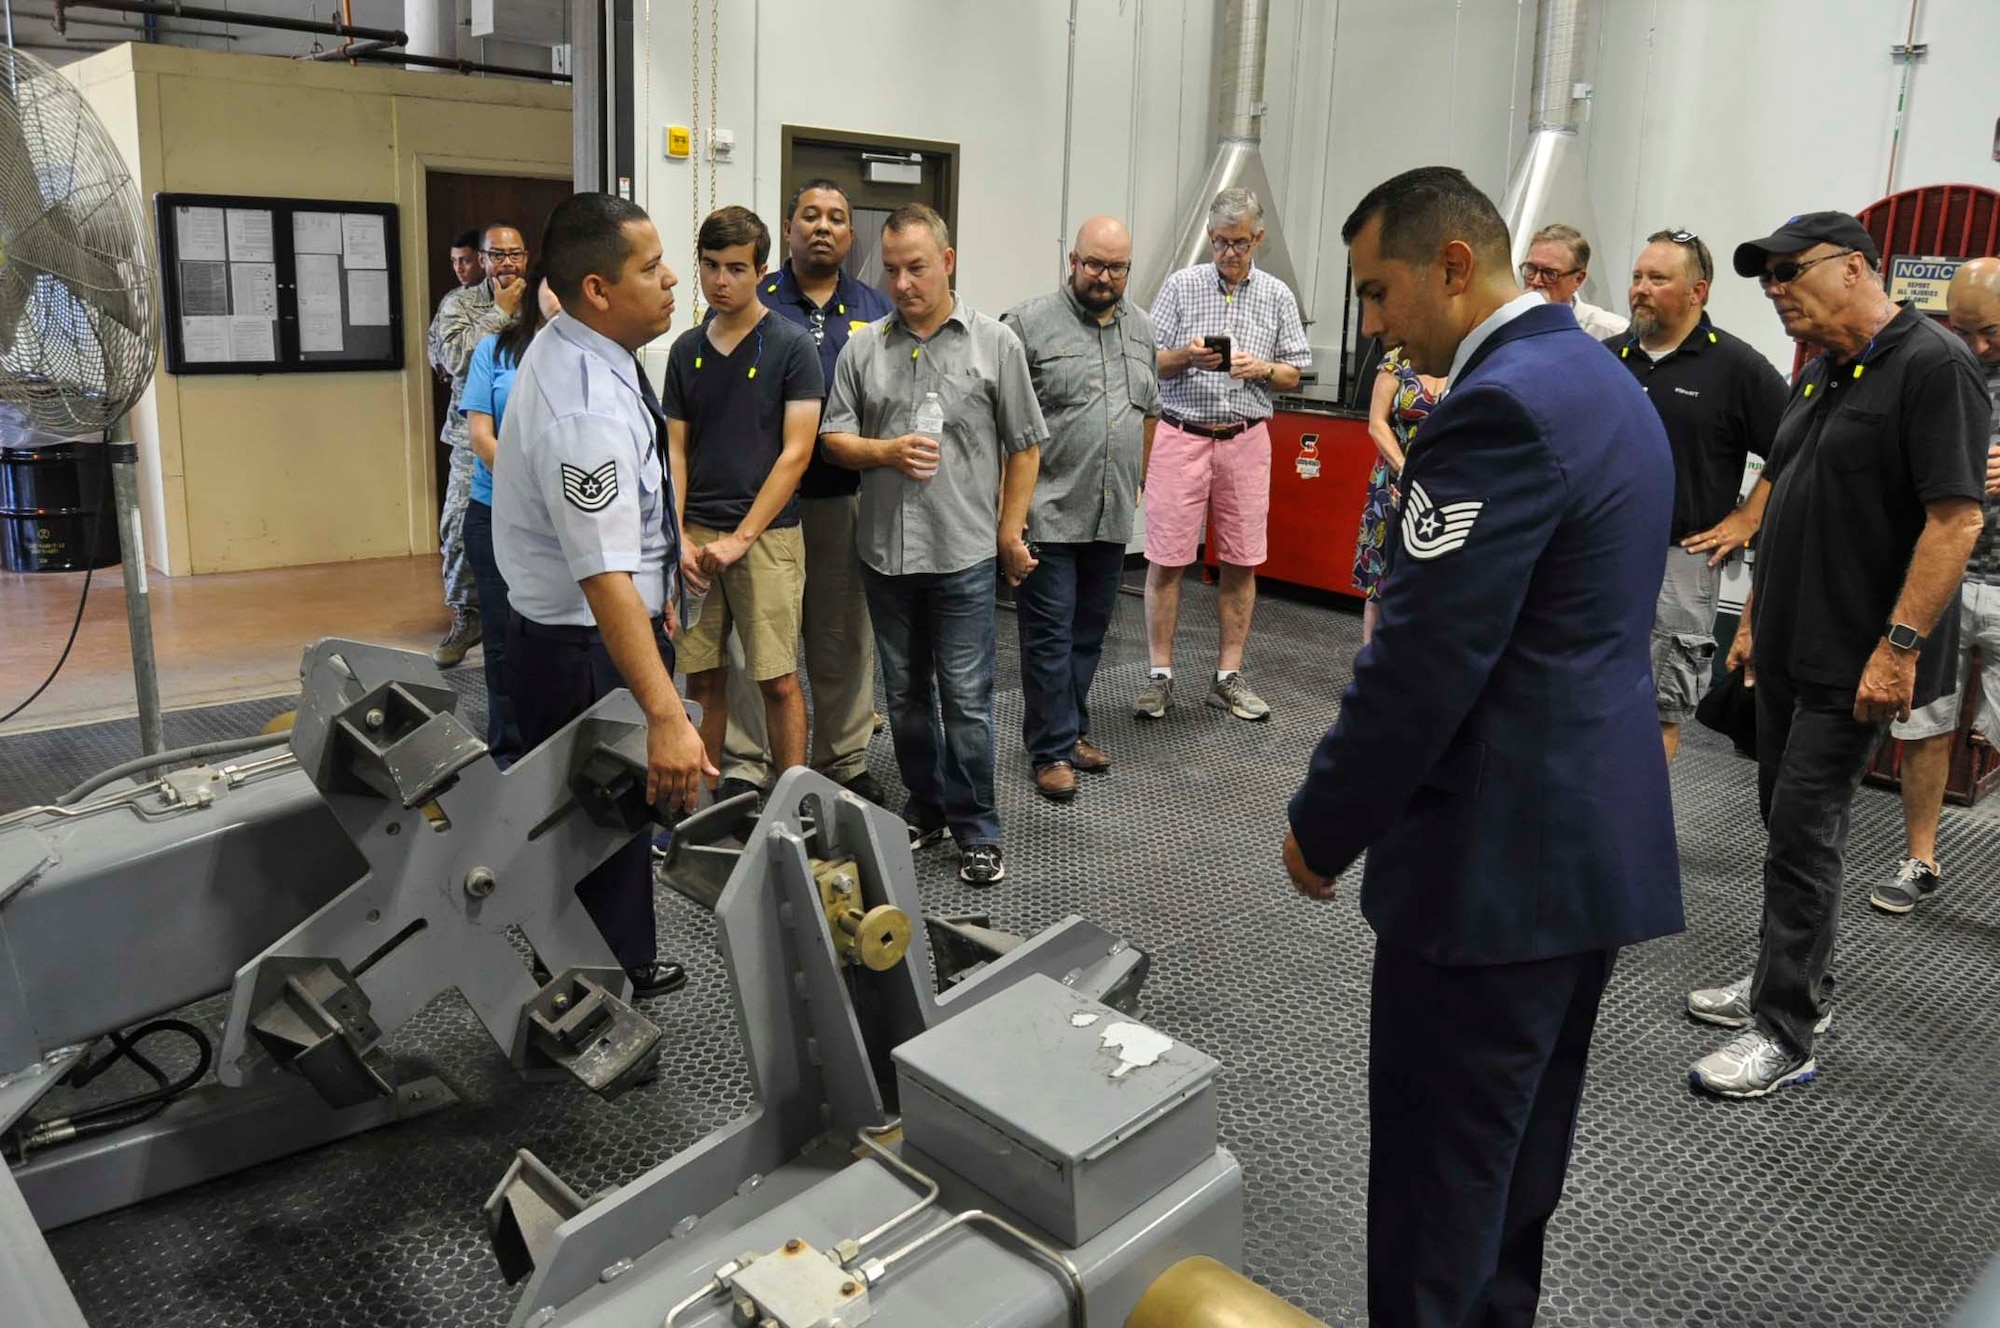 Tech Sgts. Victor Fernandez, left, and Charlie Morales, 433rd Maintenance Squadron aerospace wheel and tire technicians, demonstrate equipment used by the wheel and tire shop to 433rd Airlift Wing honorary commanders Sept. 17, 2016 during a tour of the 433rd Maintenance Group at Joint Base San Antonio-Lackland, Texas. The Airmen use the equipment to maintain and perform safety checks of the tires of the C-5M Super Galaxy. (U.S. Air Force photo/Senior Airman Bryan Swink)